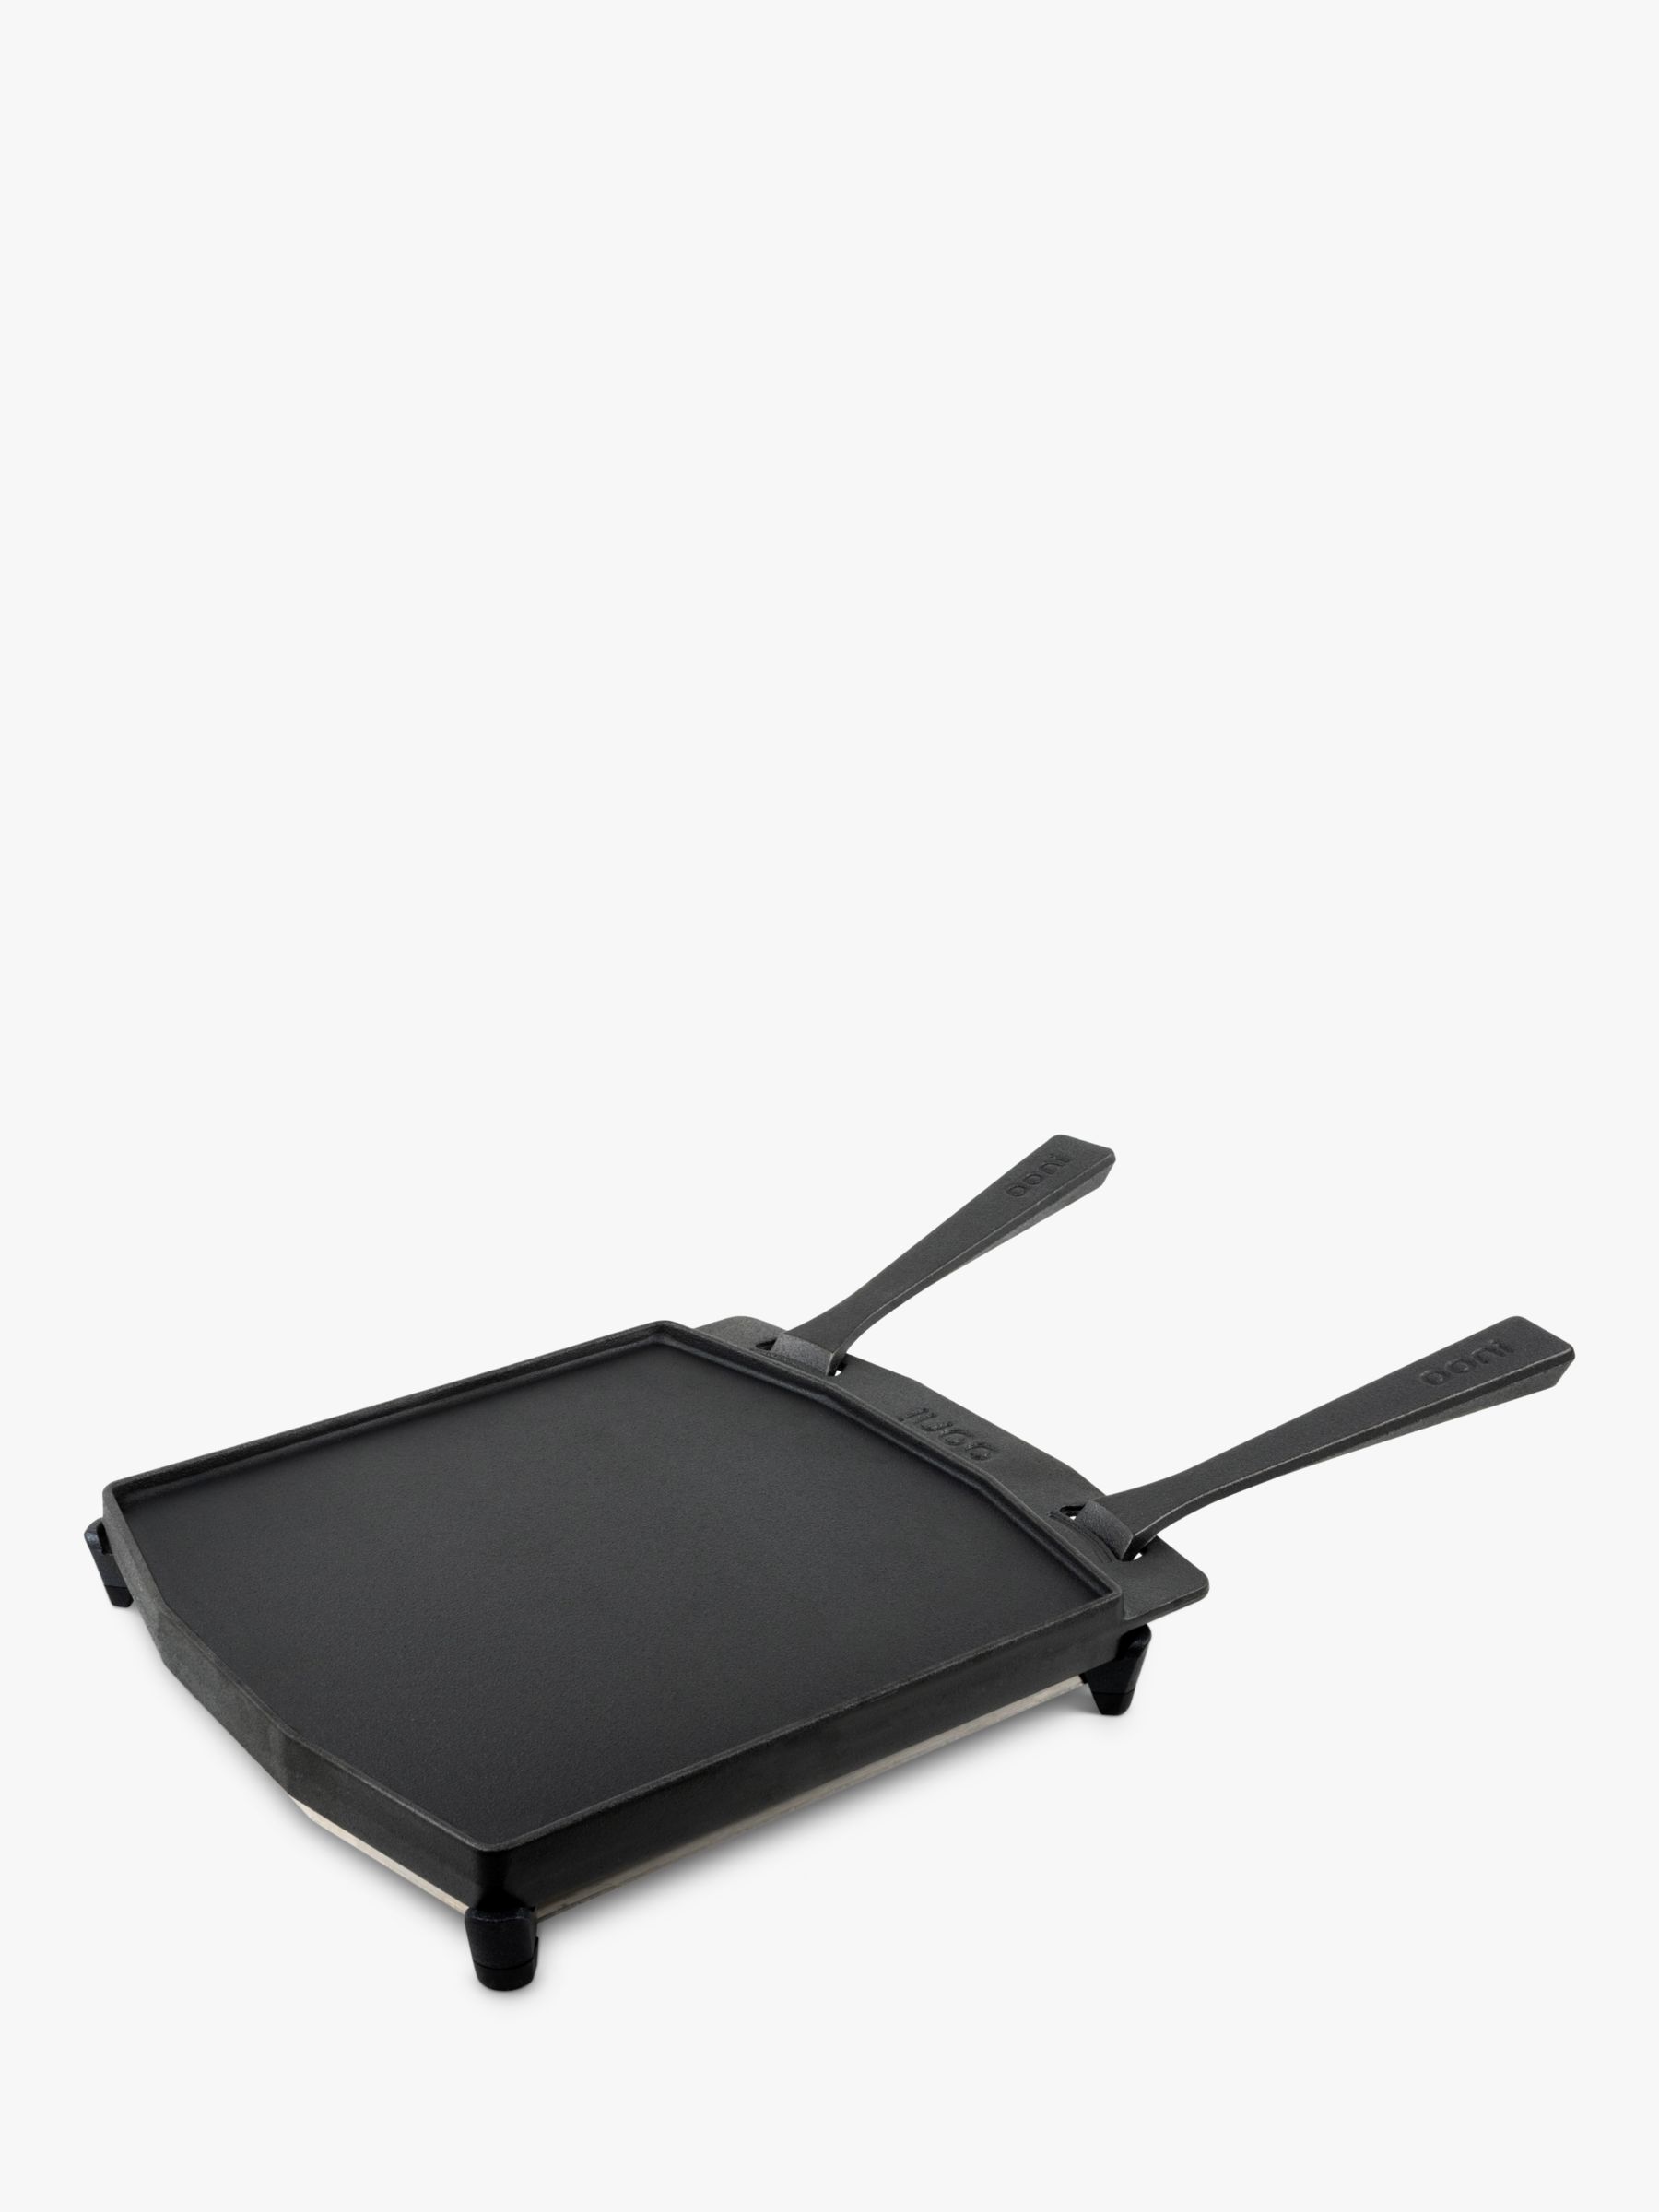 Ooni Pizza Oven Dual-Sided Grizzler Pan